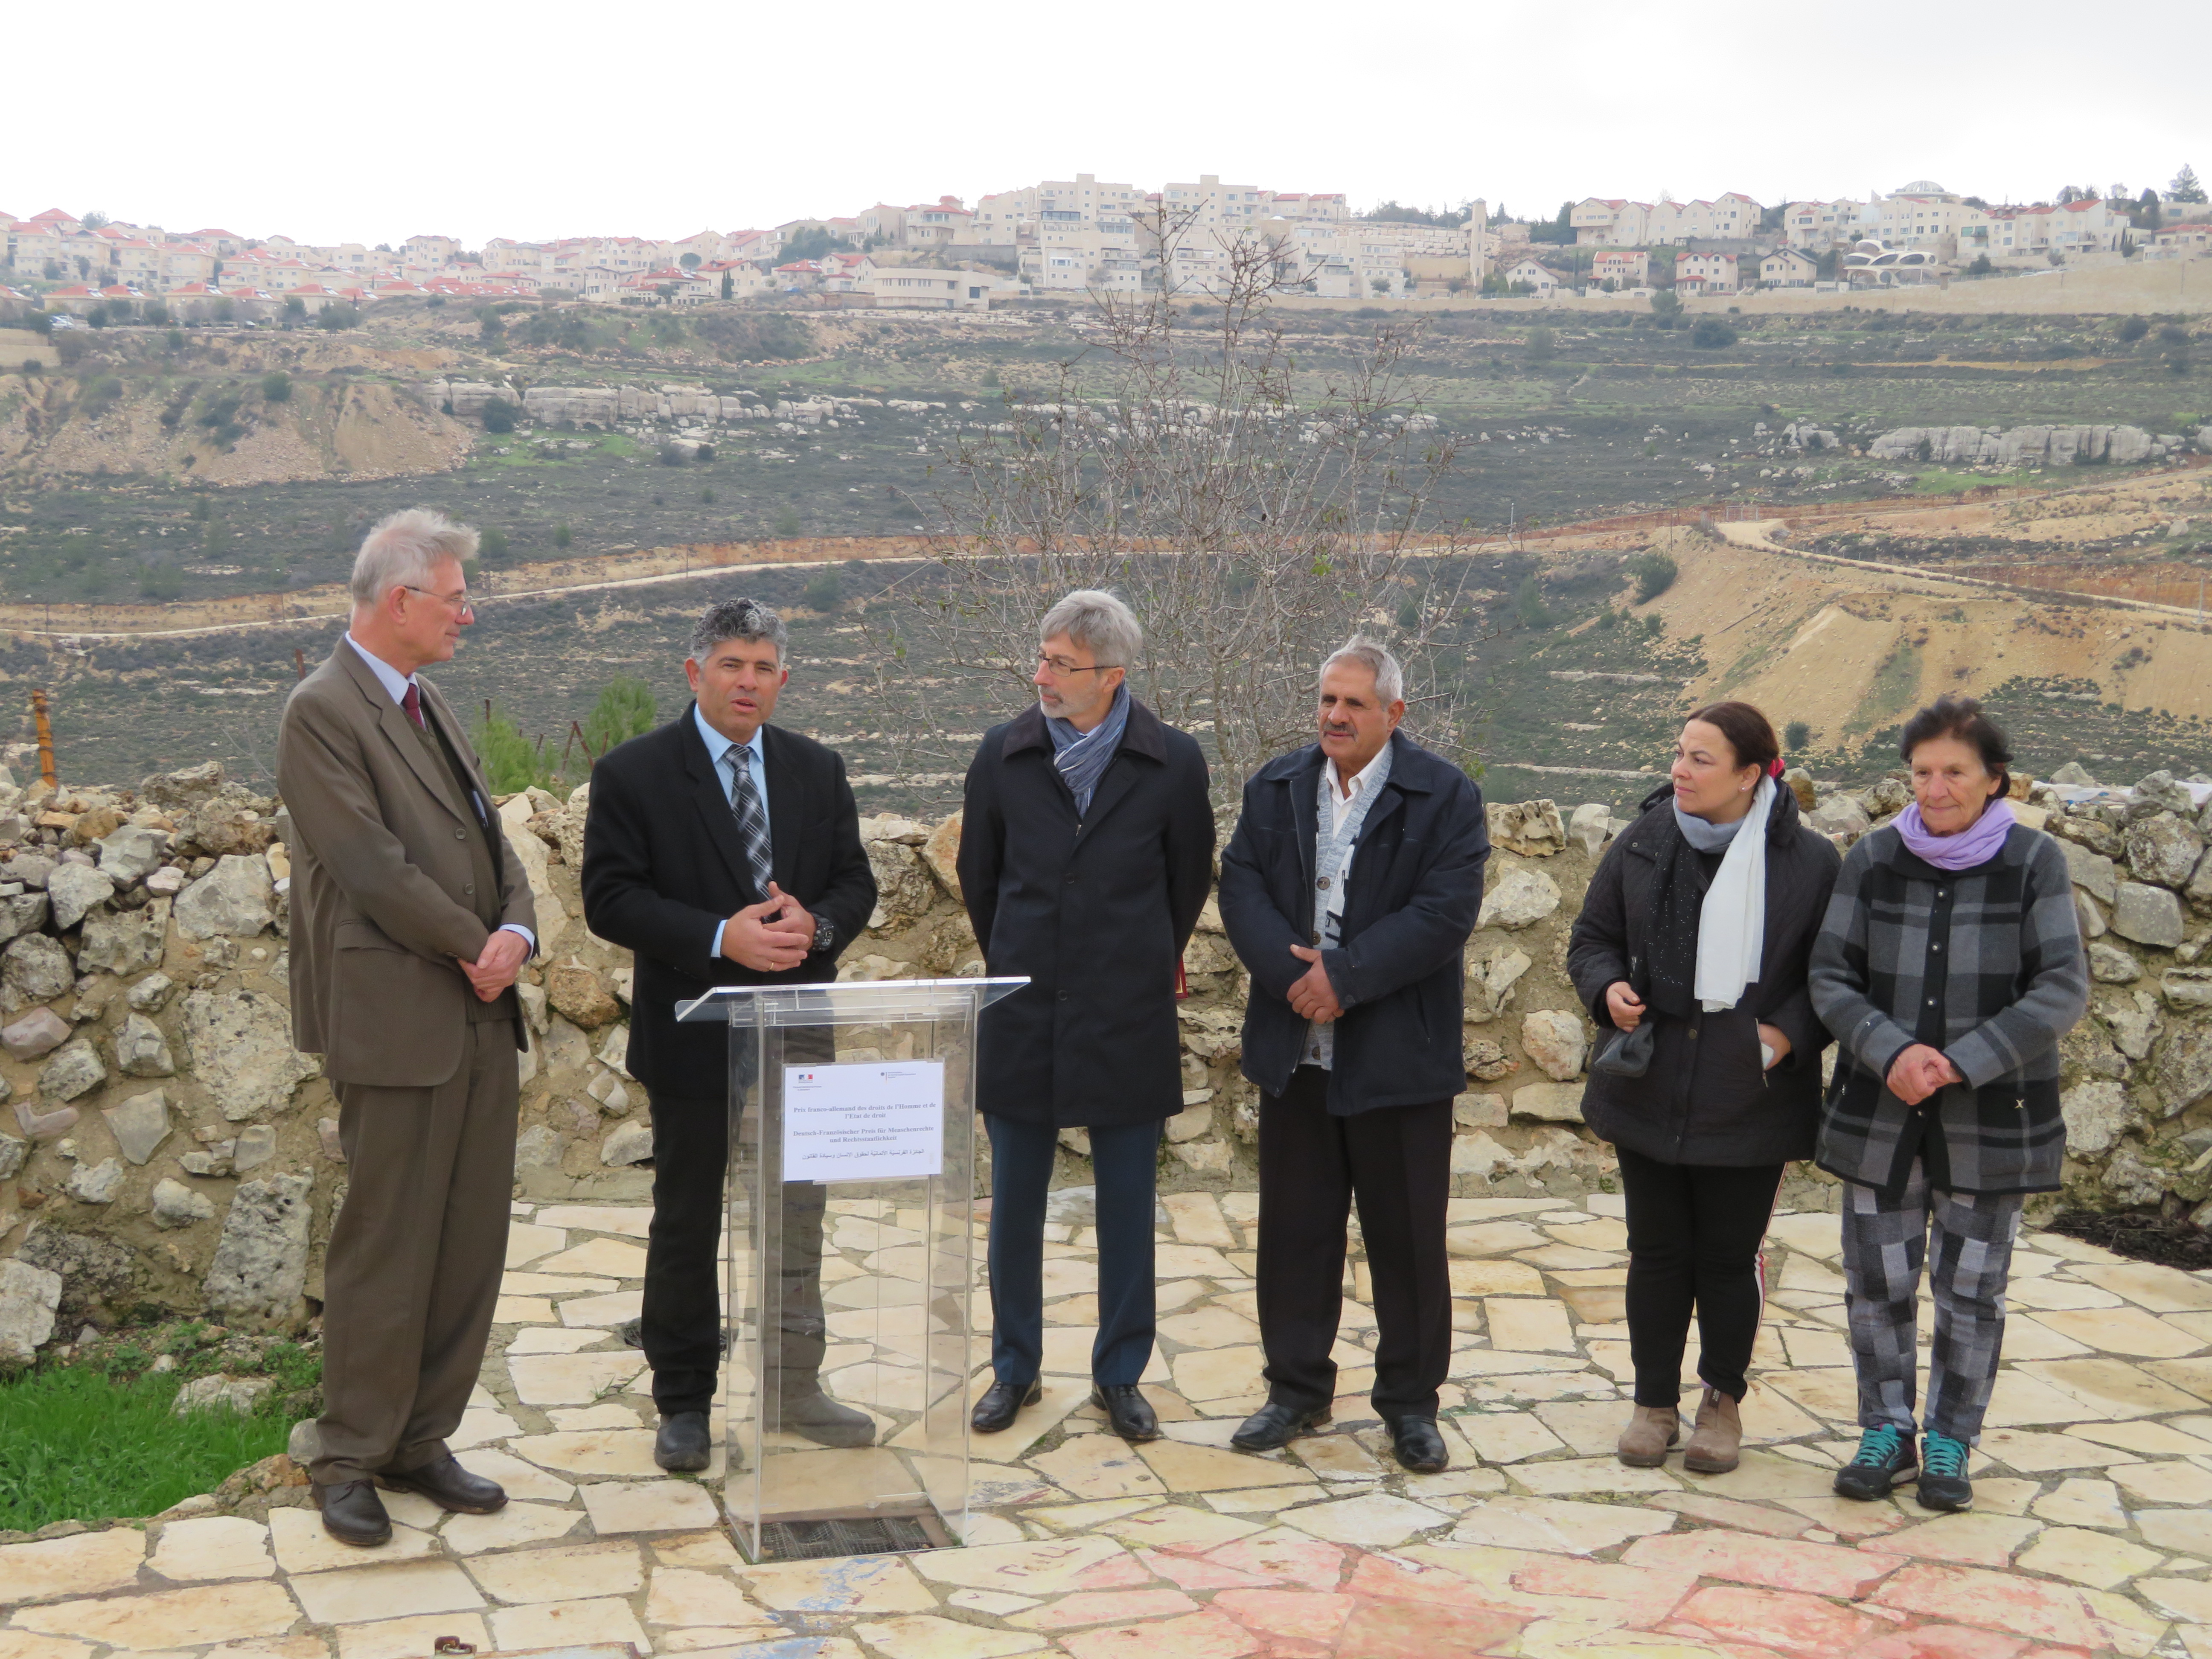 The Nassar family receives a joint French/German peace prize for their work for peace and non-violent resistance. The Israeli Settlement of Newe Daniel sits on the hilltop behind. Photo: Doug Dicks